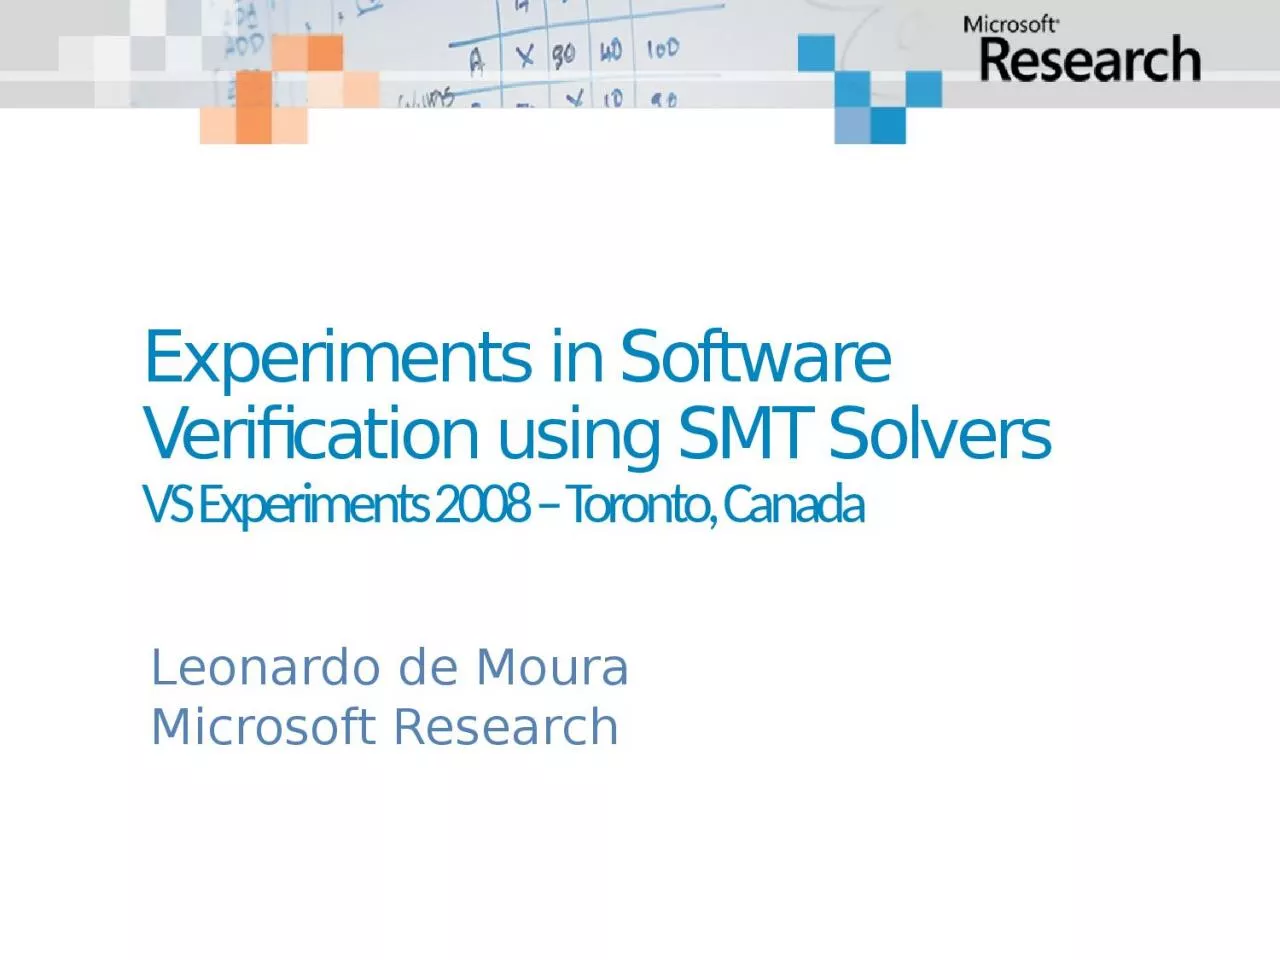 Experiments in Software Verification using SMT Solvers